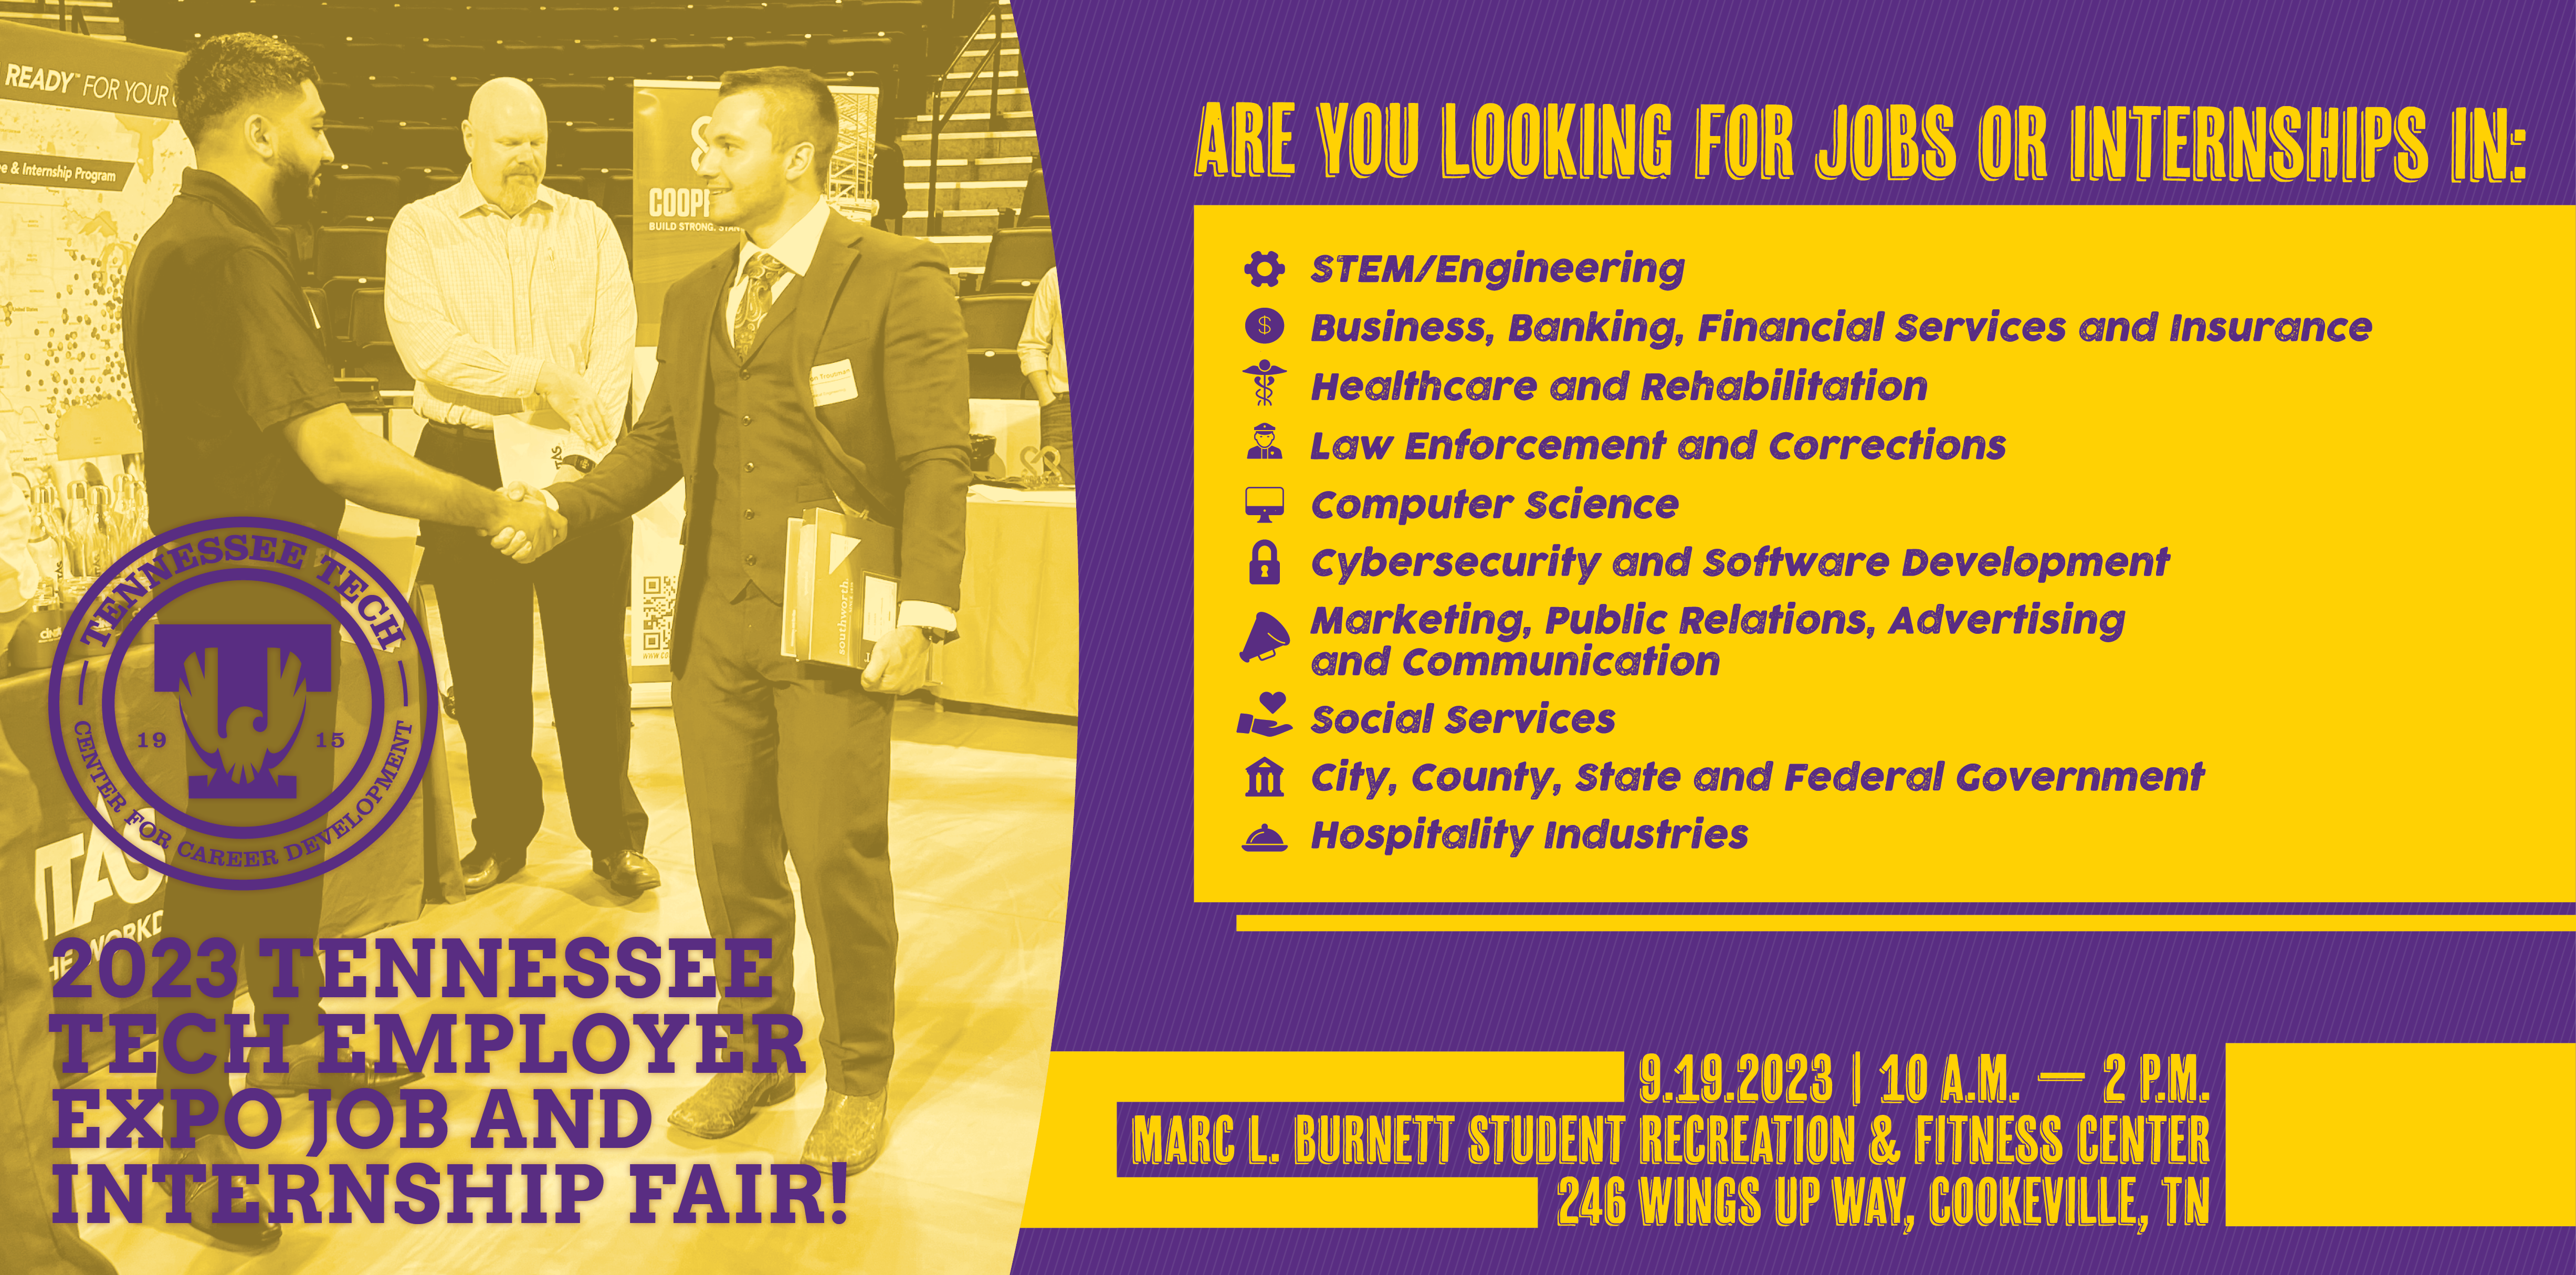 Employer Expo Job and Internship Fair, Sept. 19, 10 AM to 2 PM, at the Fitness Center